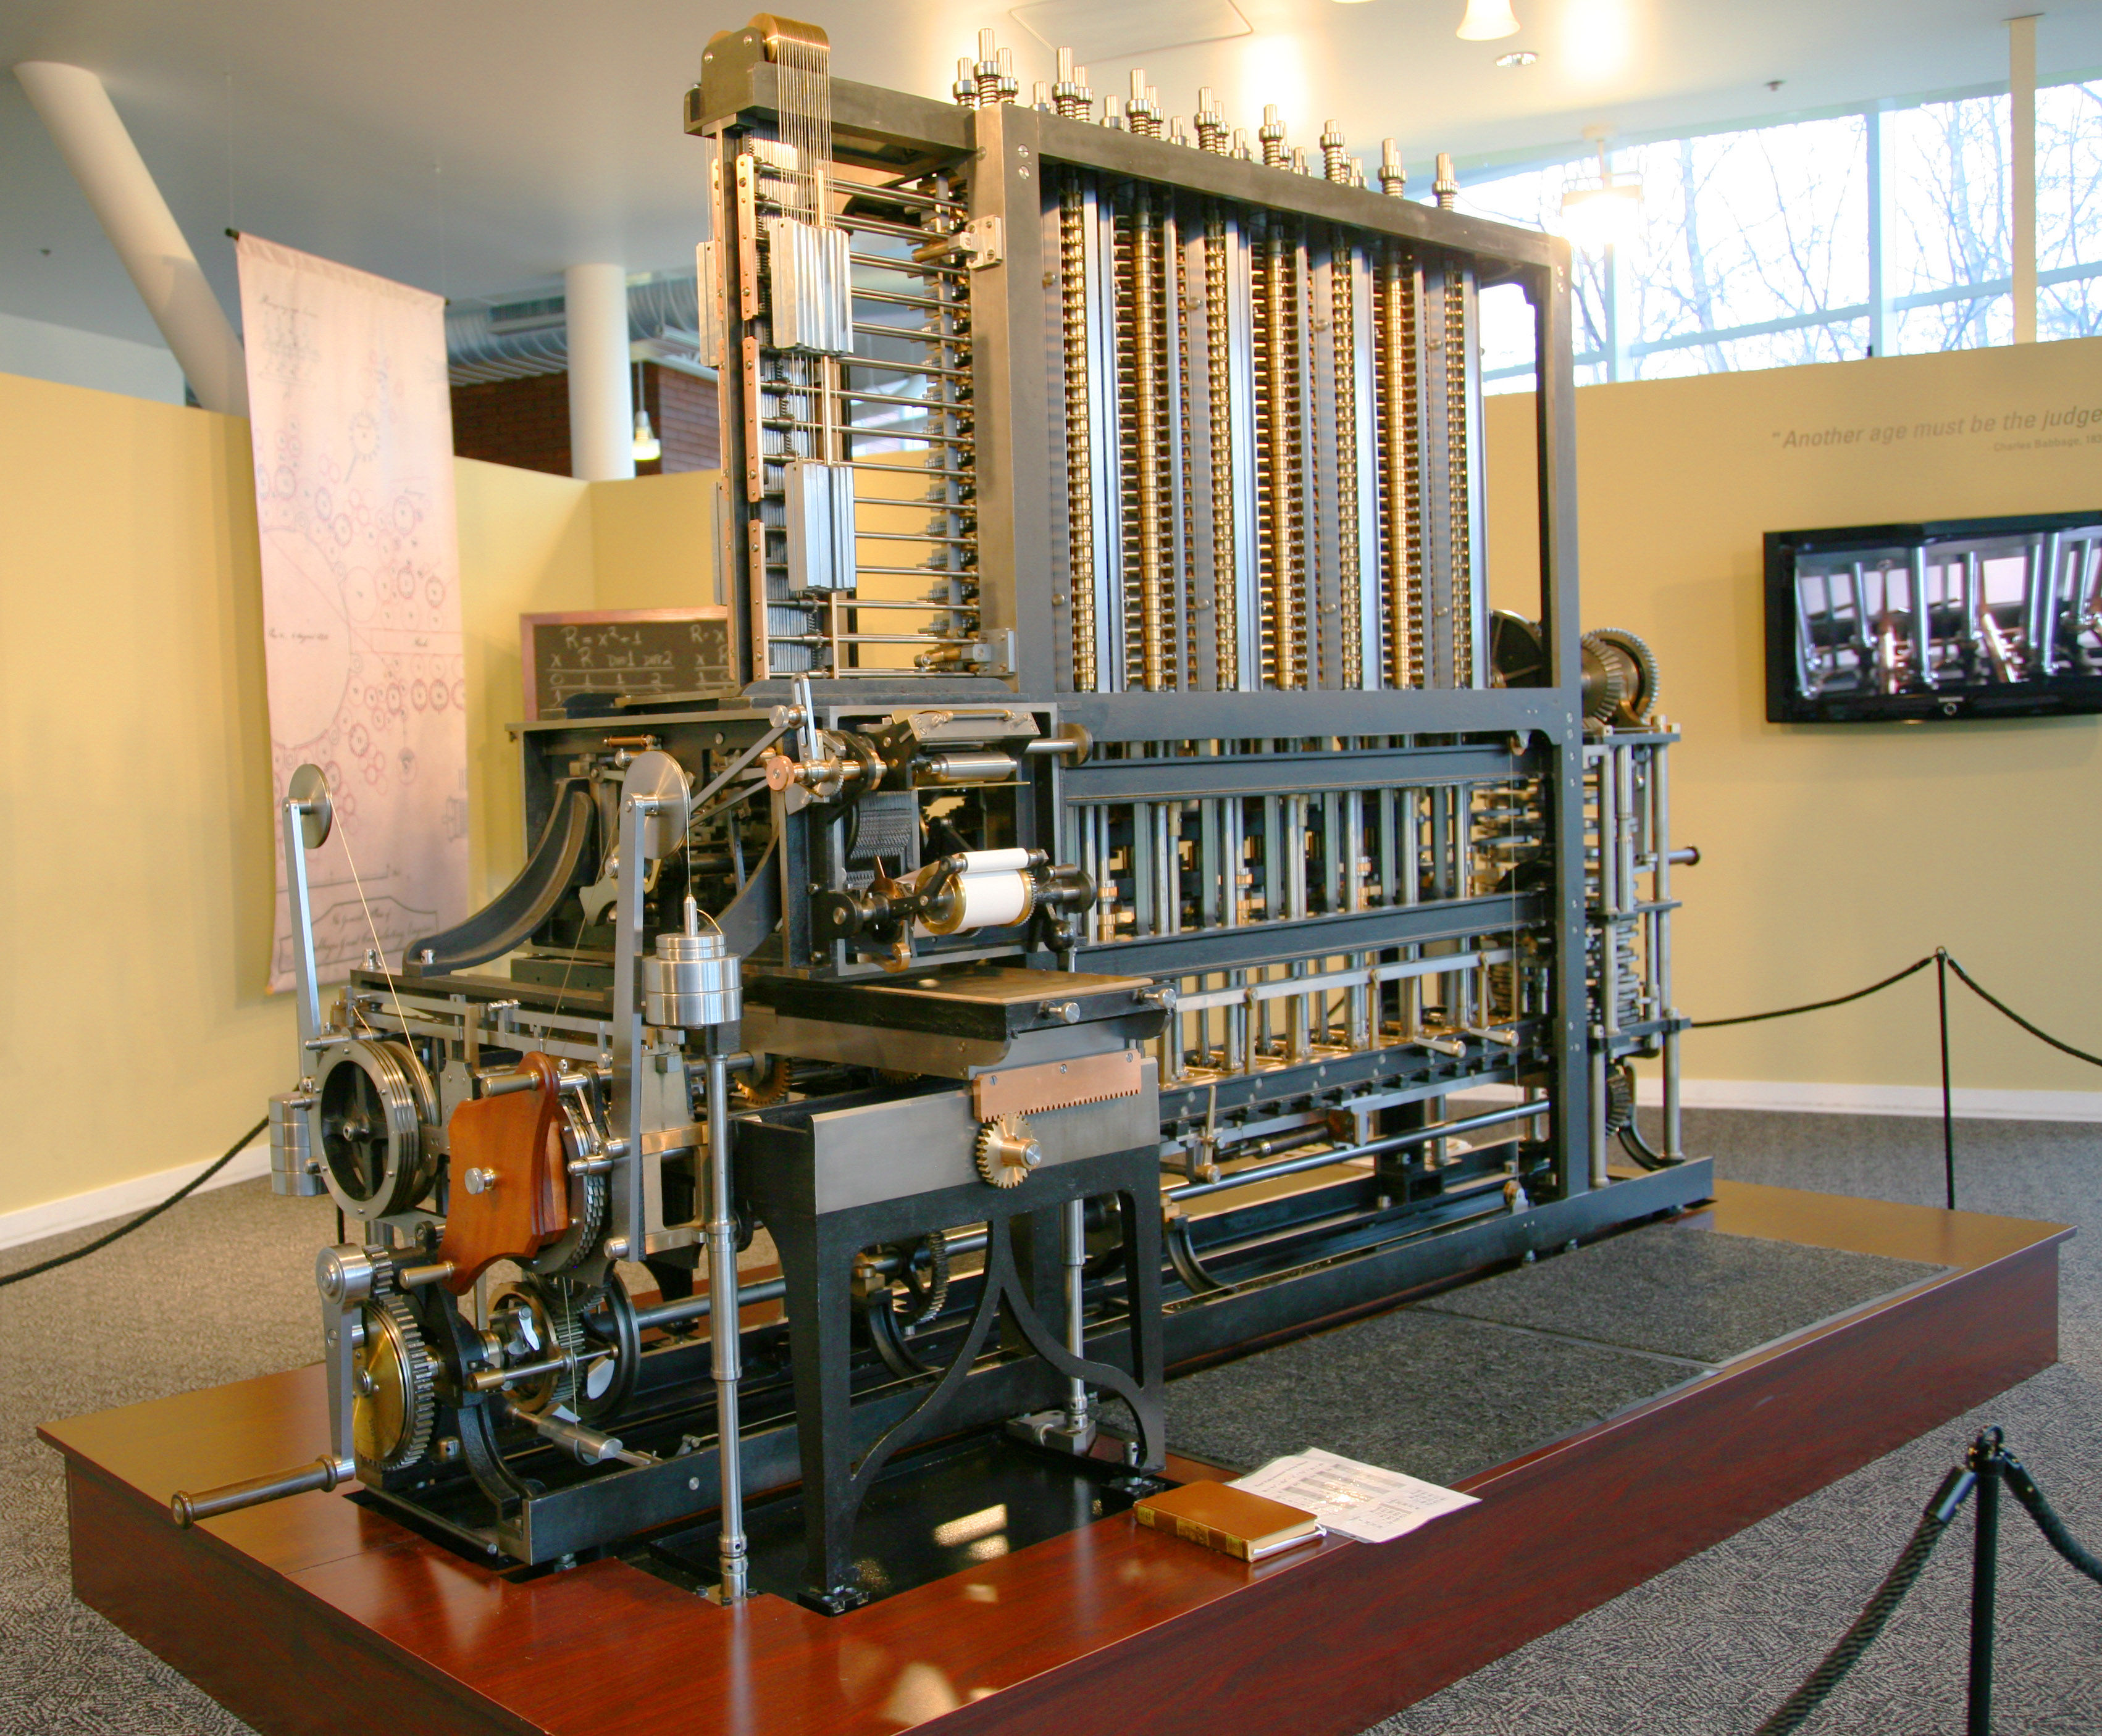 Charles Babbage (1791-1871) designed the first automatic computing engines. He invented computers but failed to build them. The first complete Babbage Engine was completed in London in 2002, 153 years